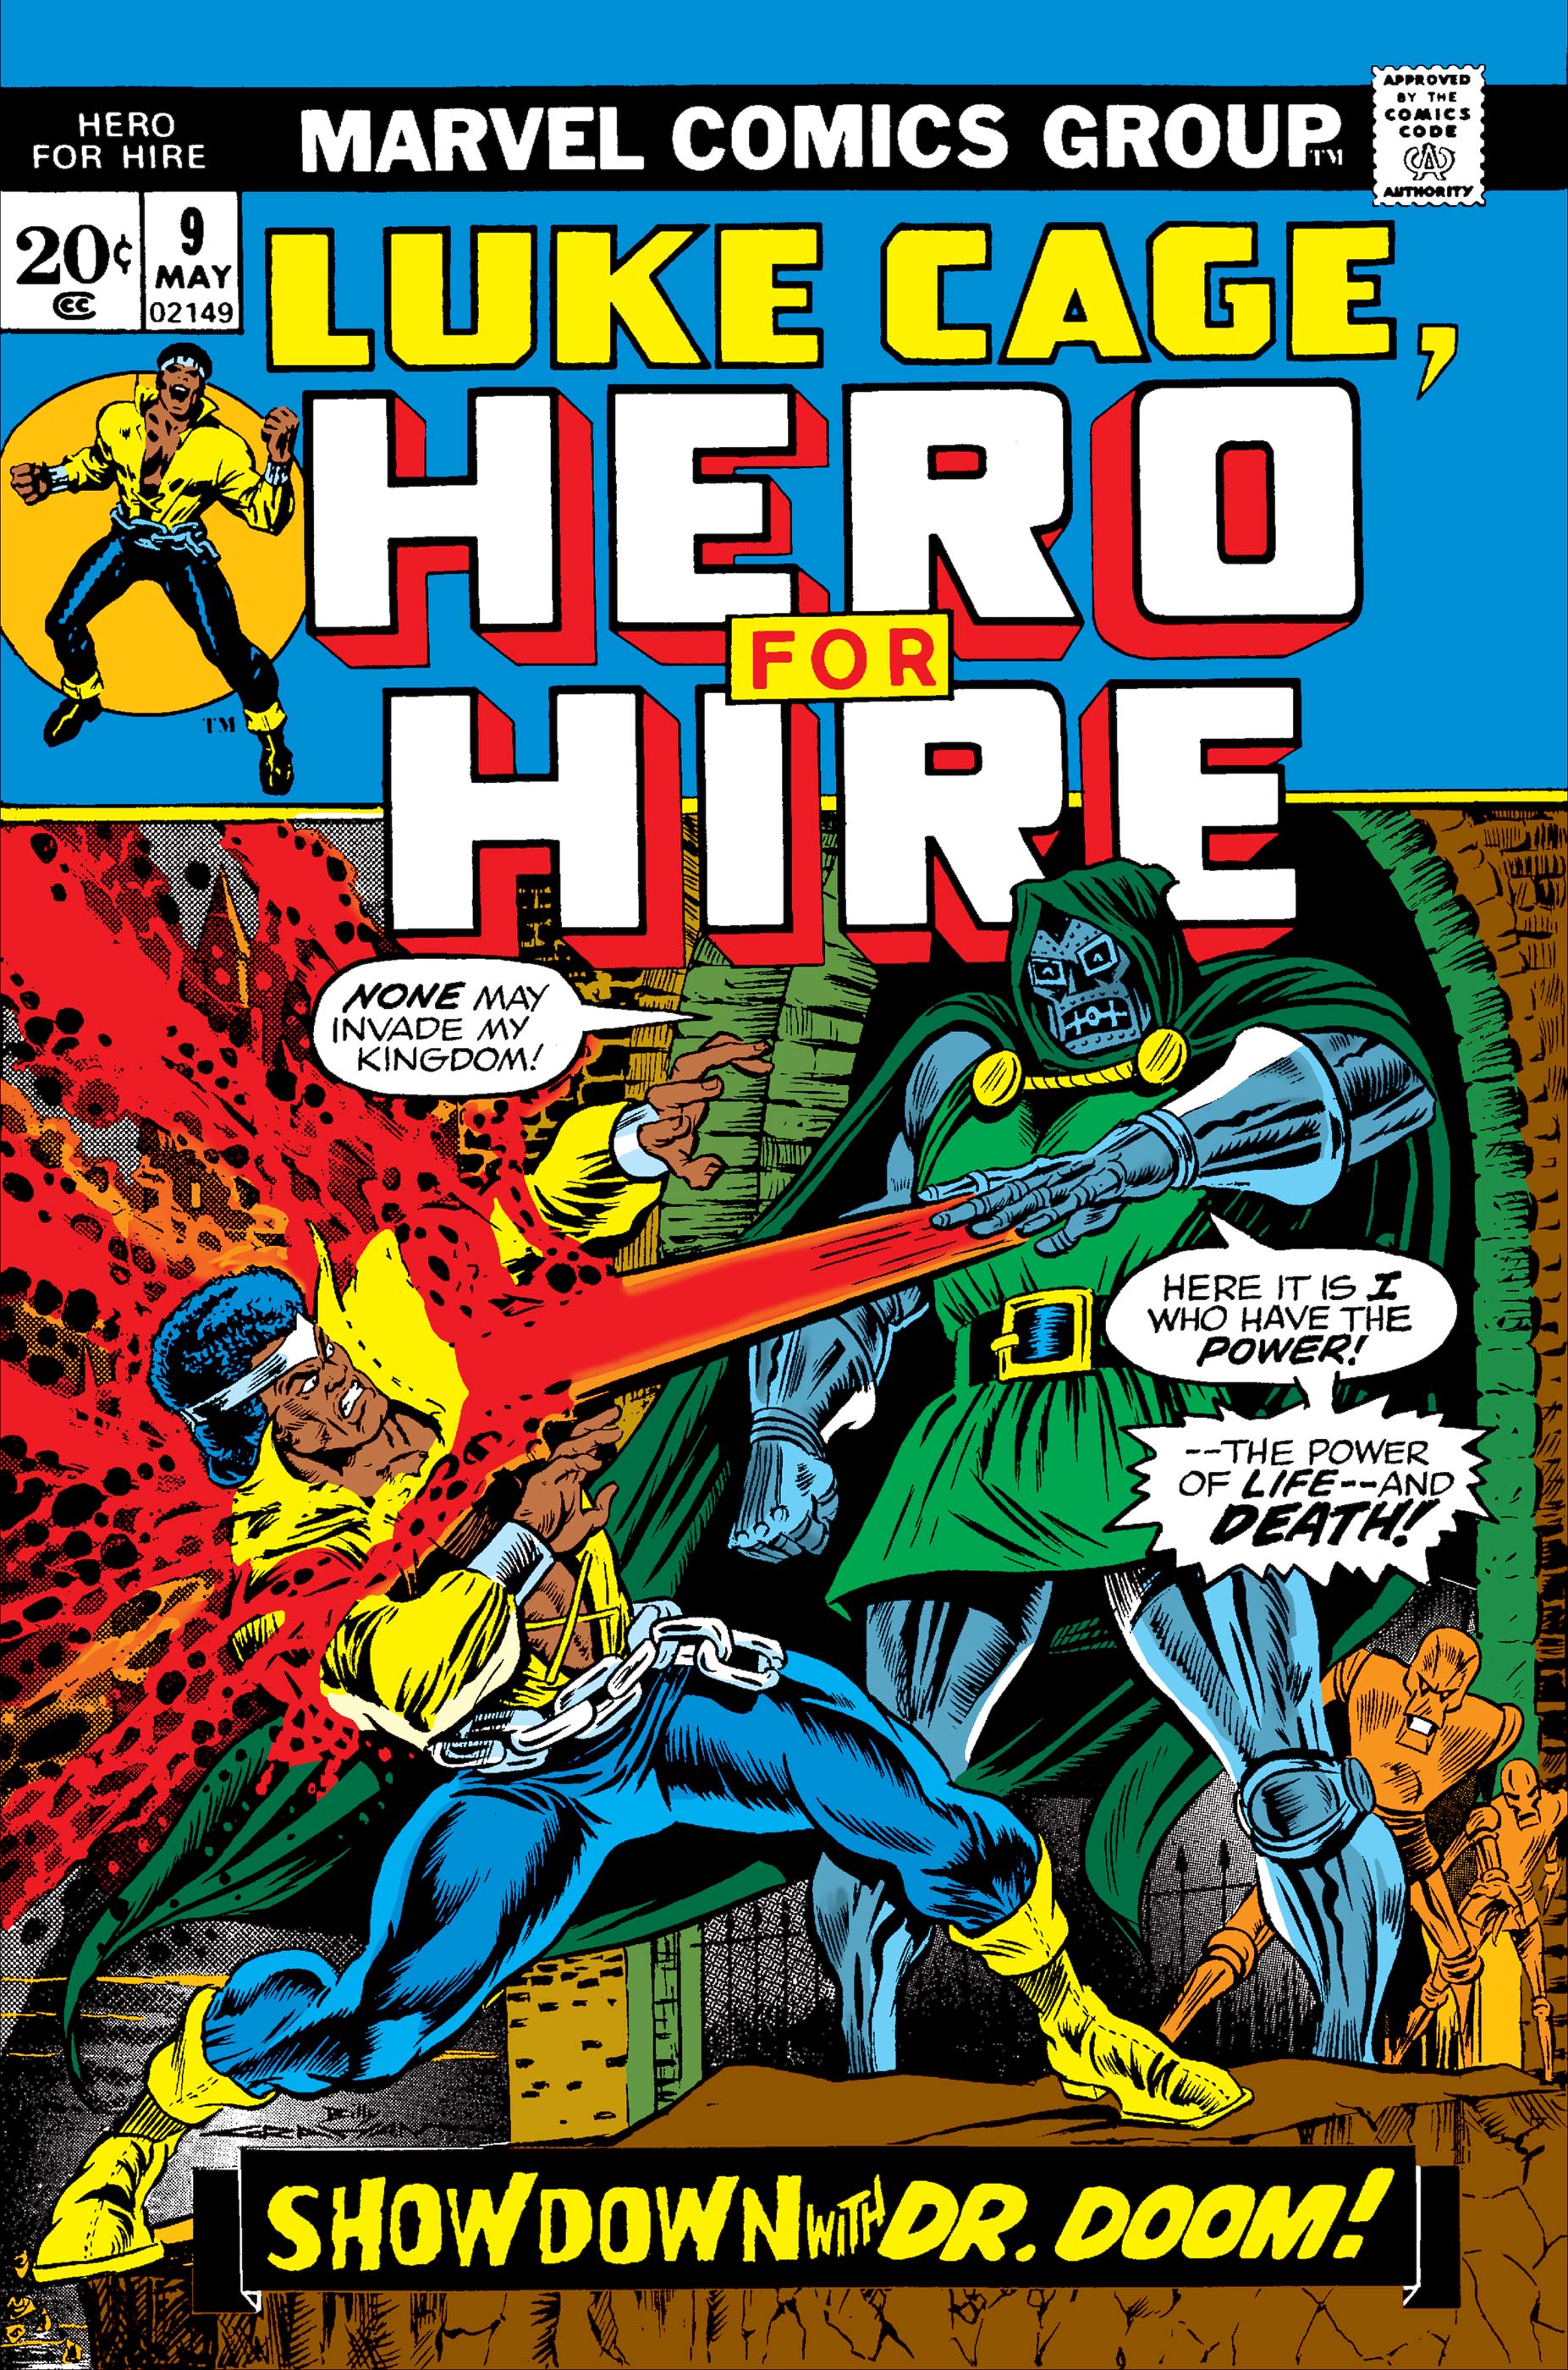 Hero for Hire (1972) #9